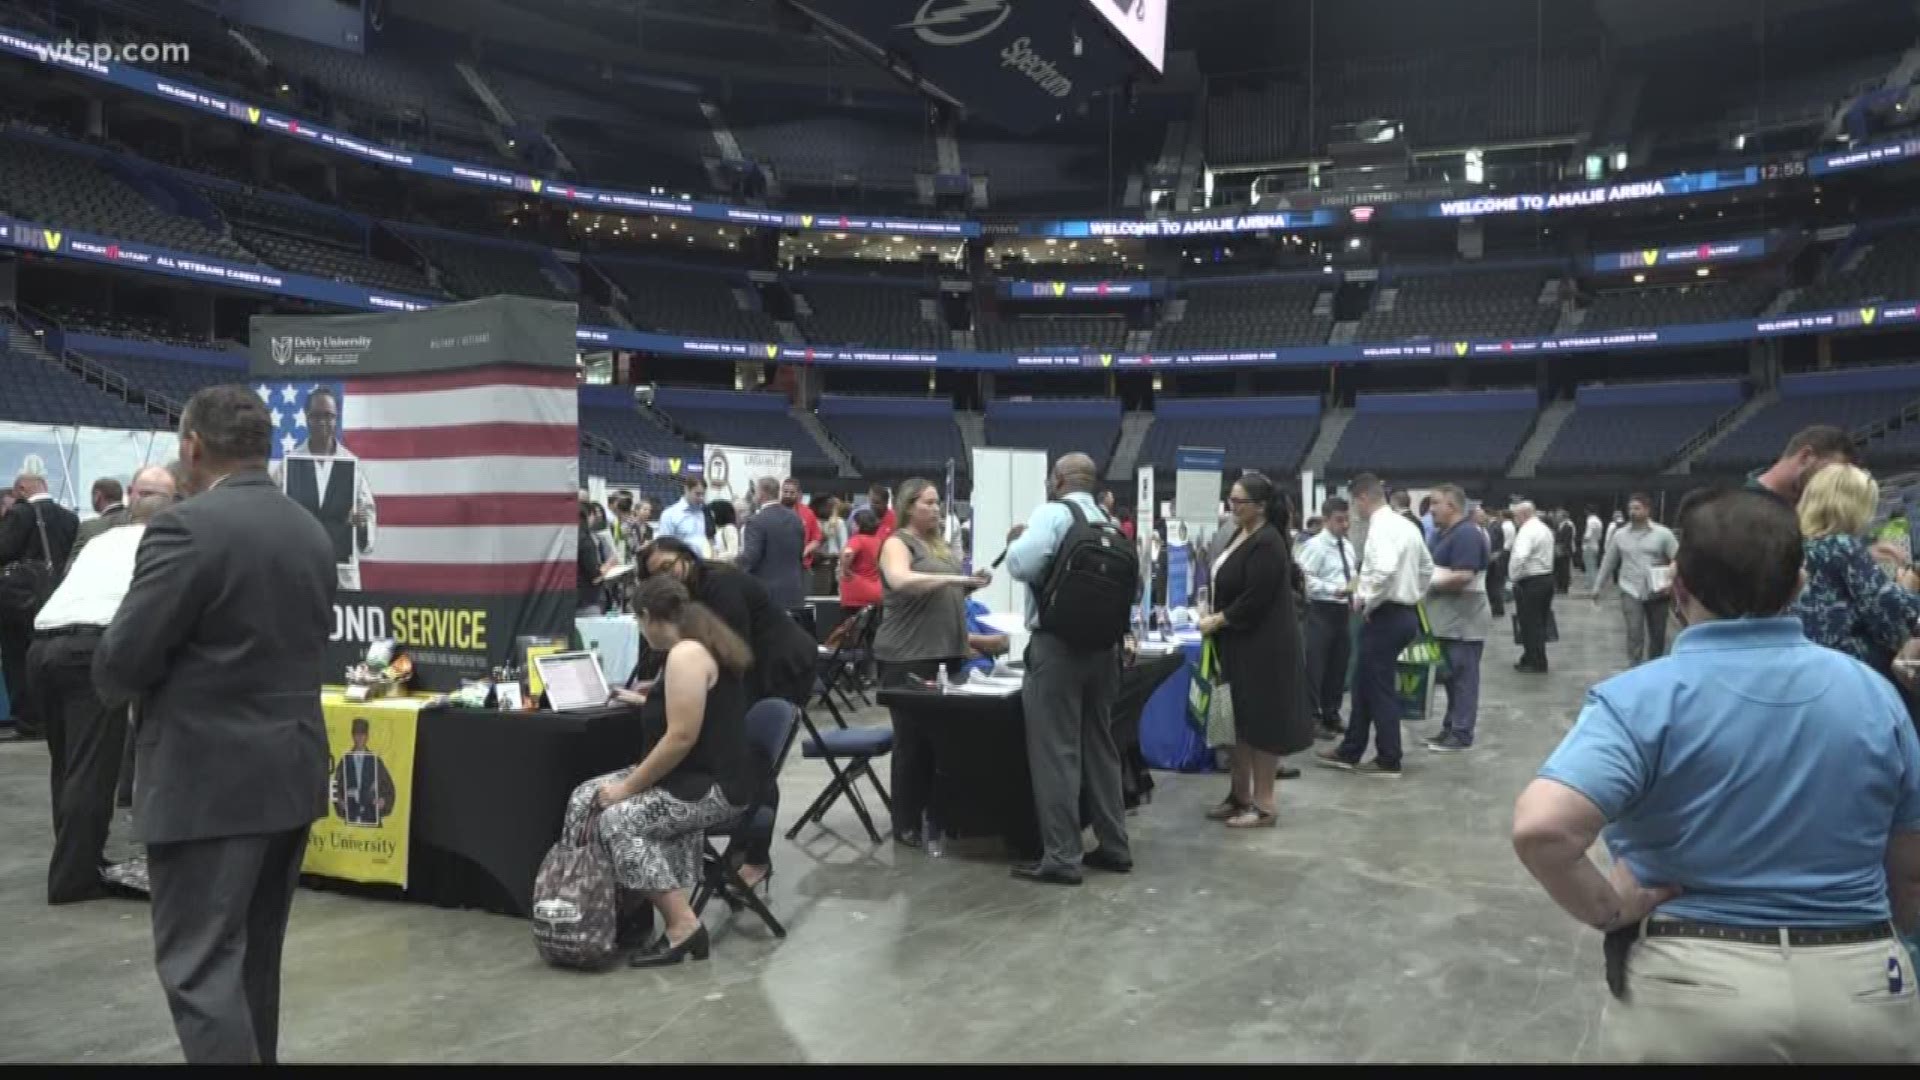 RecruitMilitary is hosting a job fair for veterans Thursday from 11am-3pm at Amalie Arena, featuring more than 90 employers ready to hire.

The event is free and welcomes all veterans, military spouses, transitioning military, National Guard members, and Reservists.

The organization is teaming up with Disabled American Veterans not only to help vets find work but to focus on the more than 600,000 military spouses in the United States who are unemployed or underemployed in their professional careers.